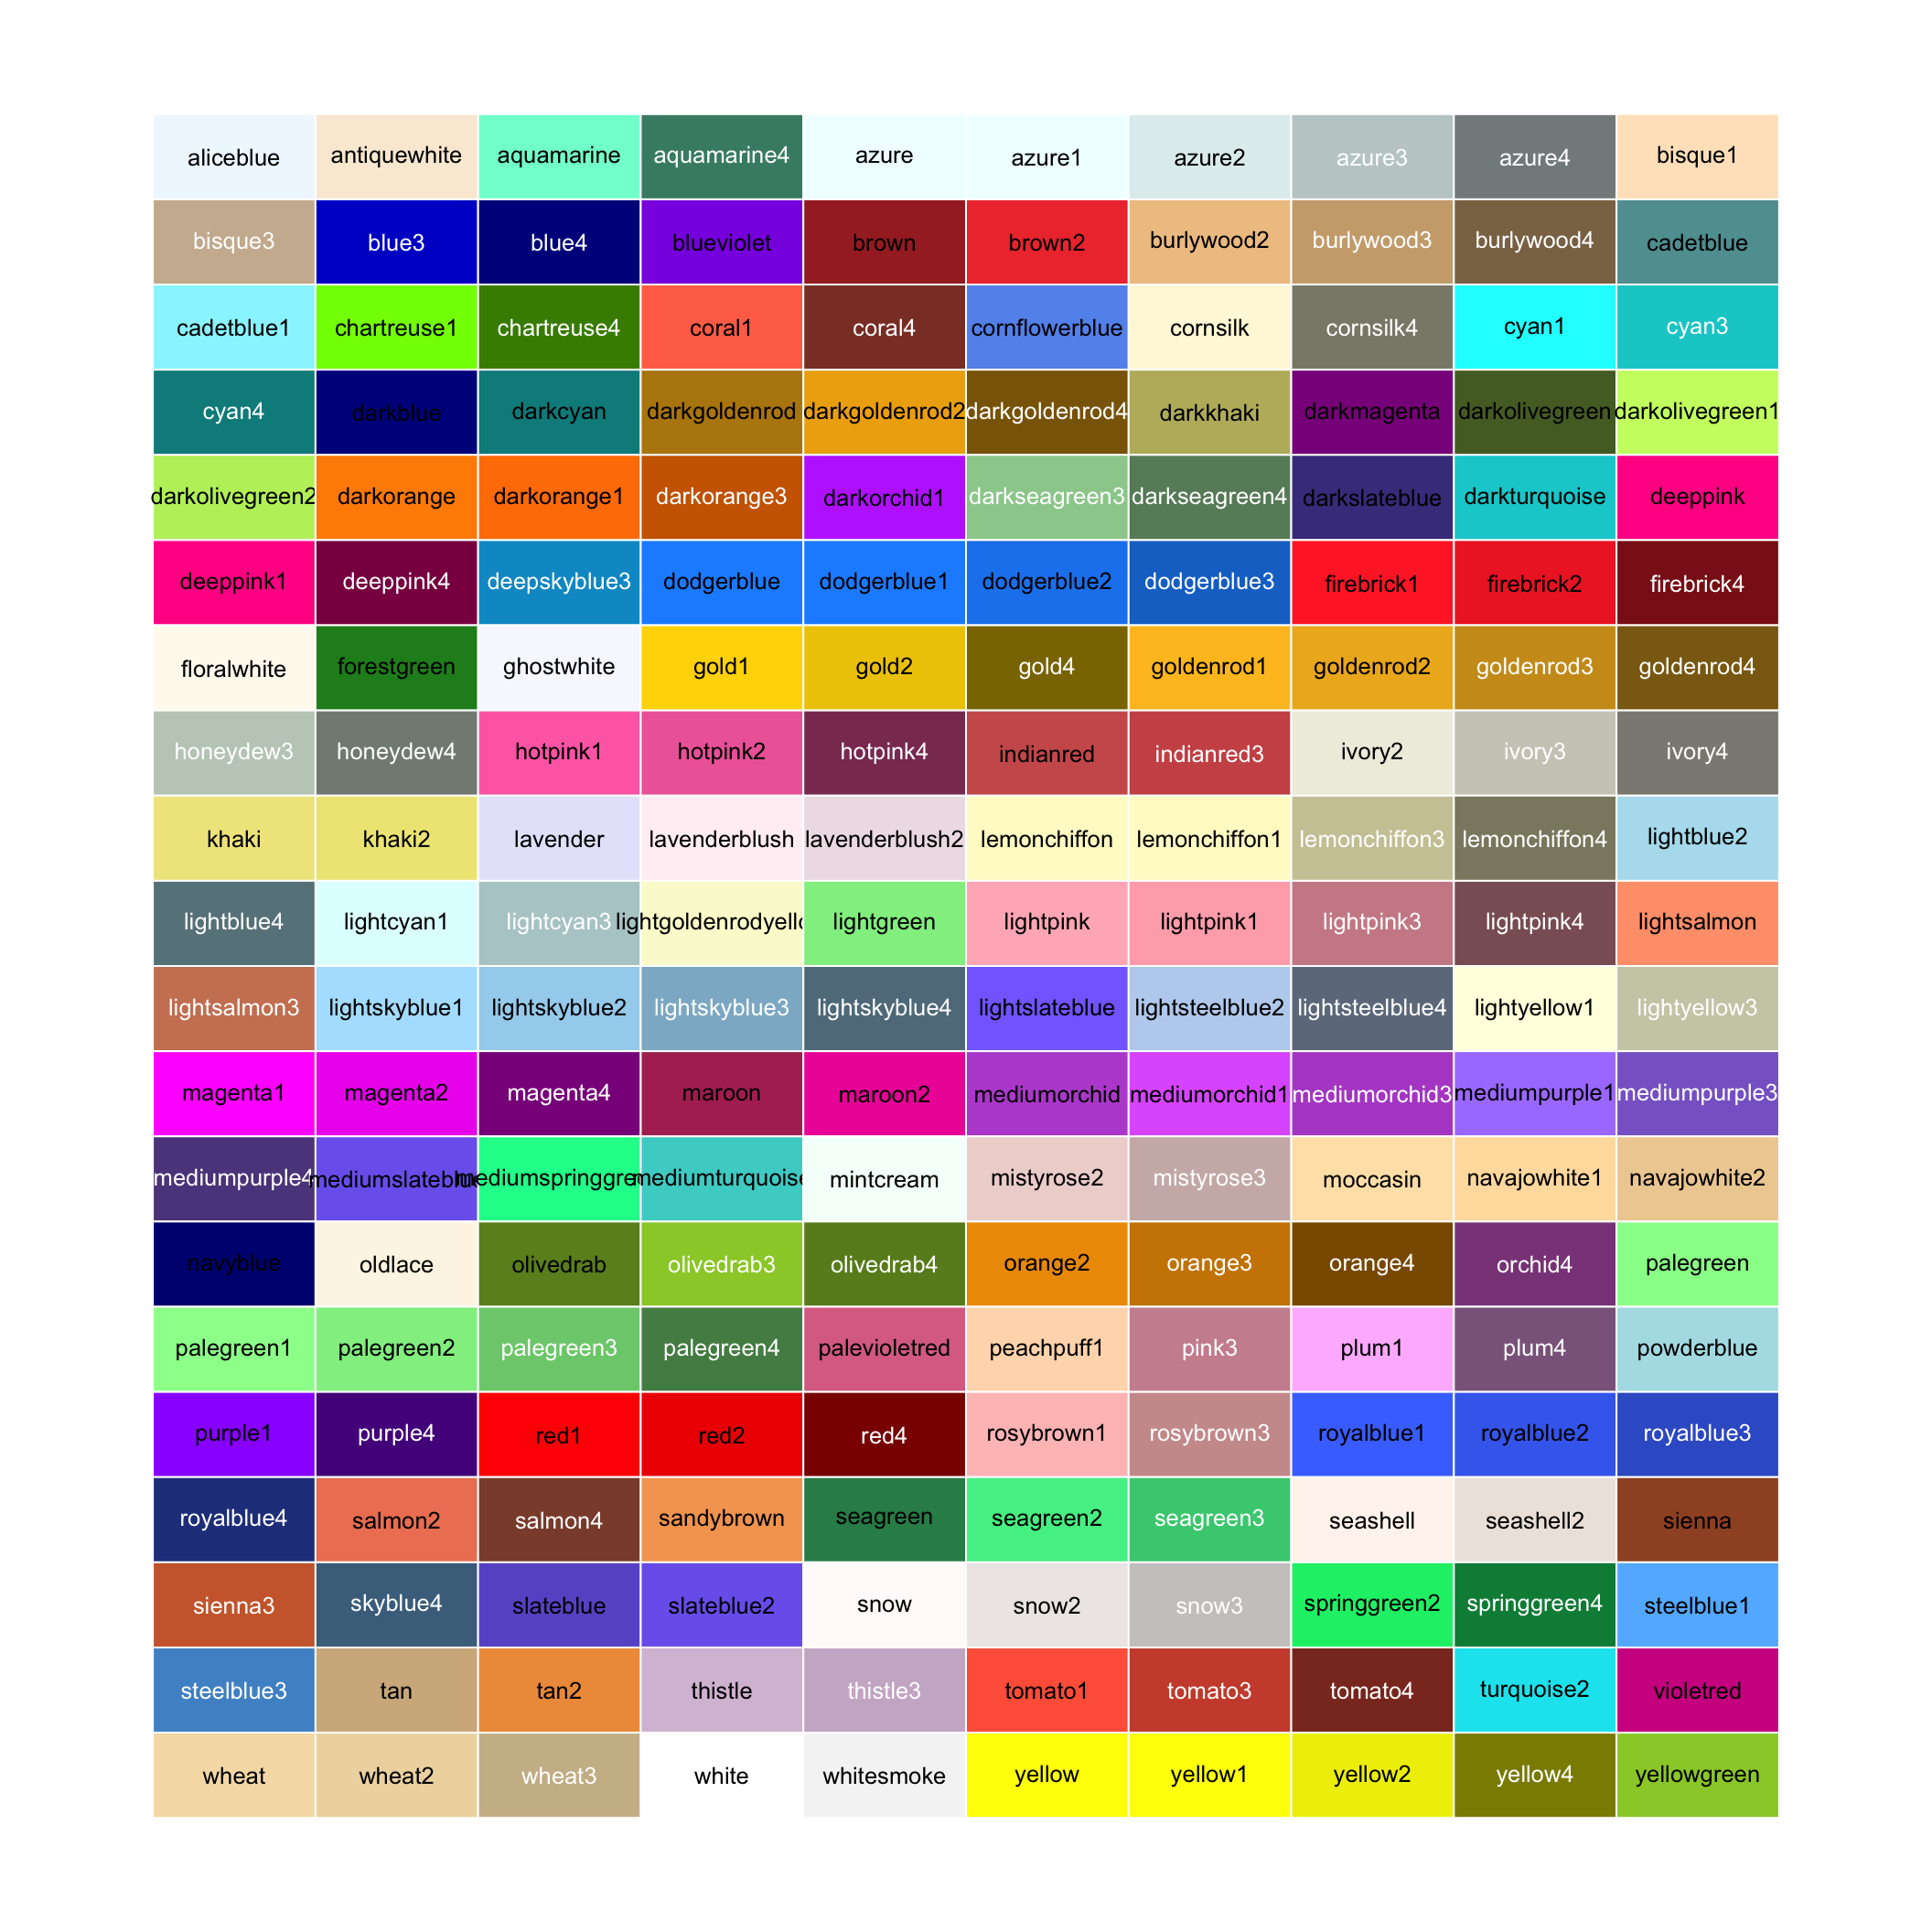 200 random (non-gray) colors (from colors()) and their names in R.